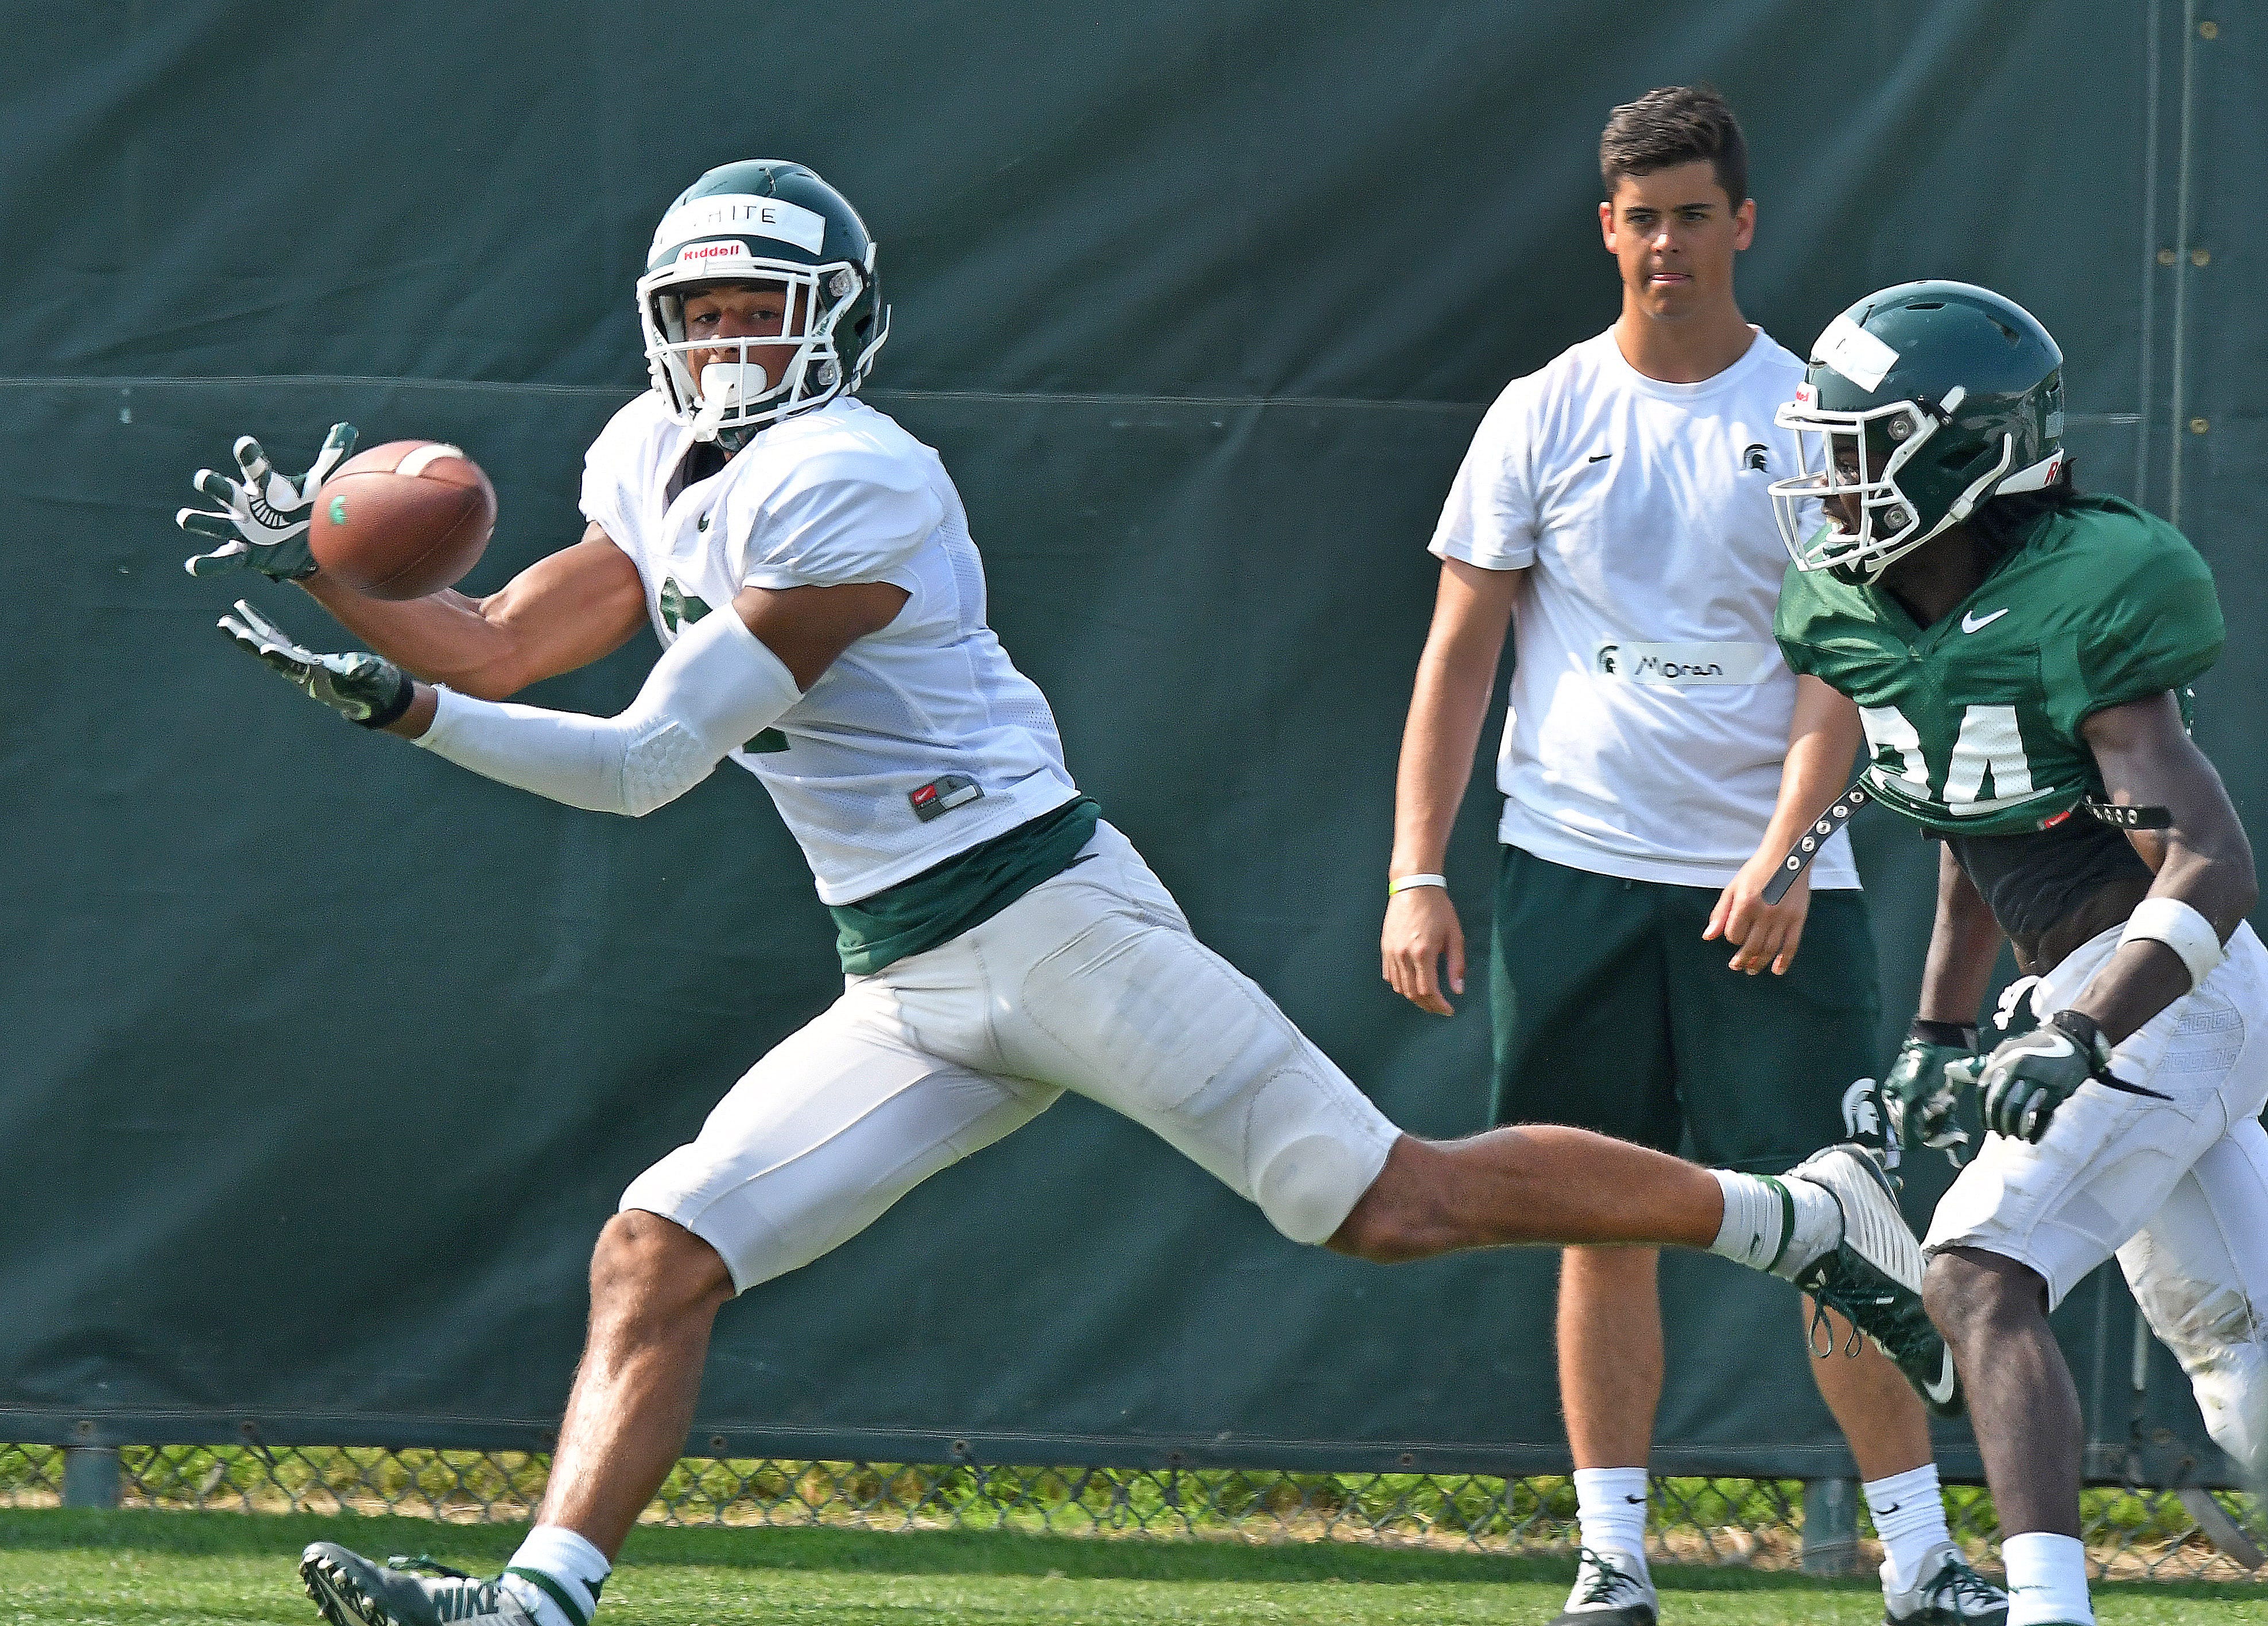 Michigan State receiver Cody White (left) gets out in front of Tre Person in the end zone and catches a touchdown pass.